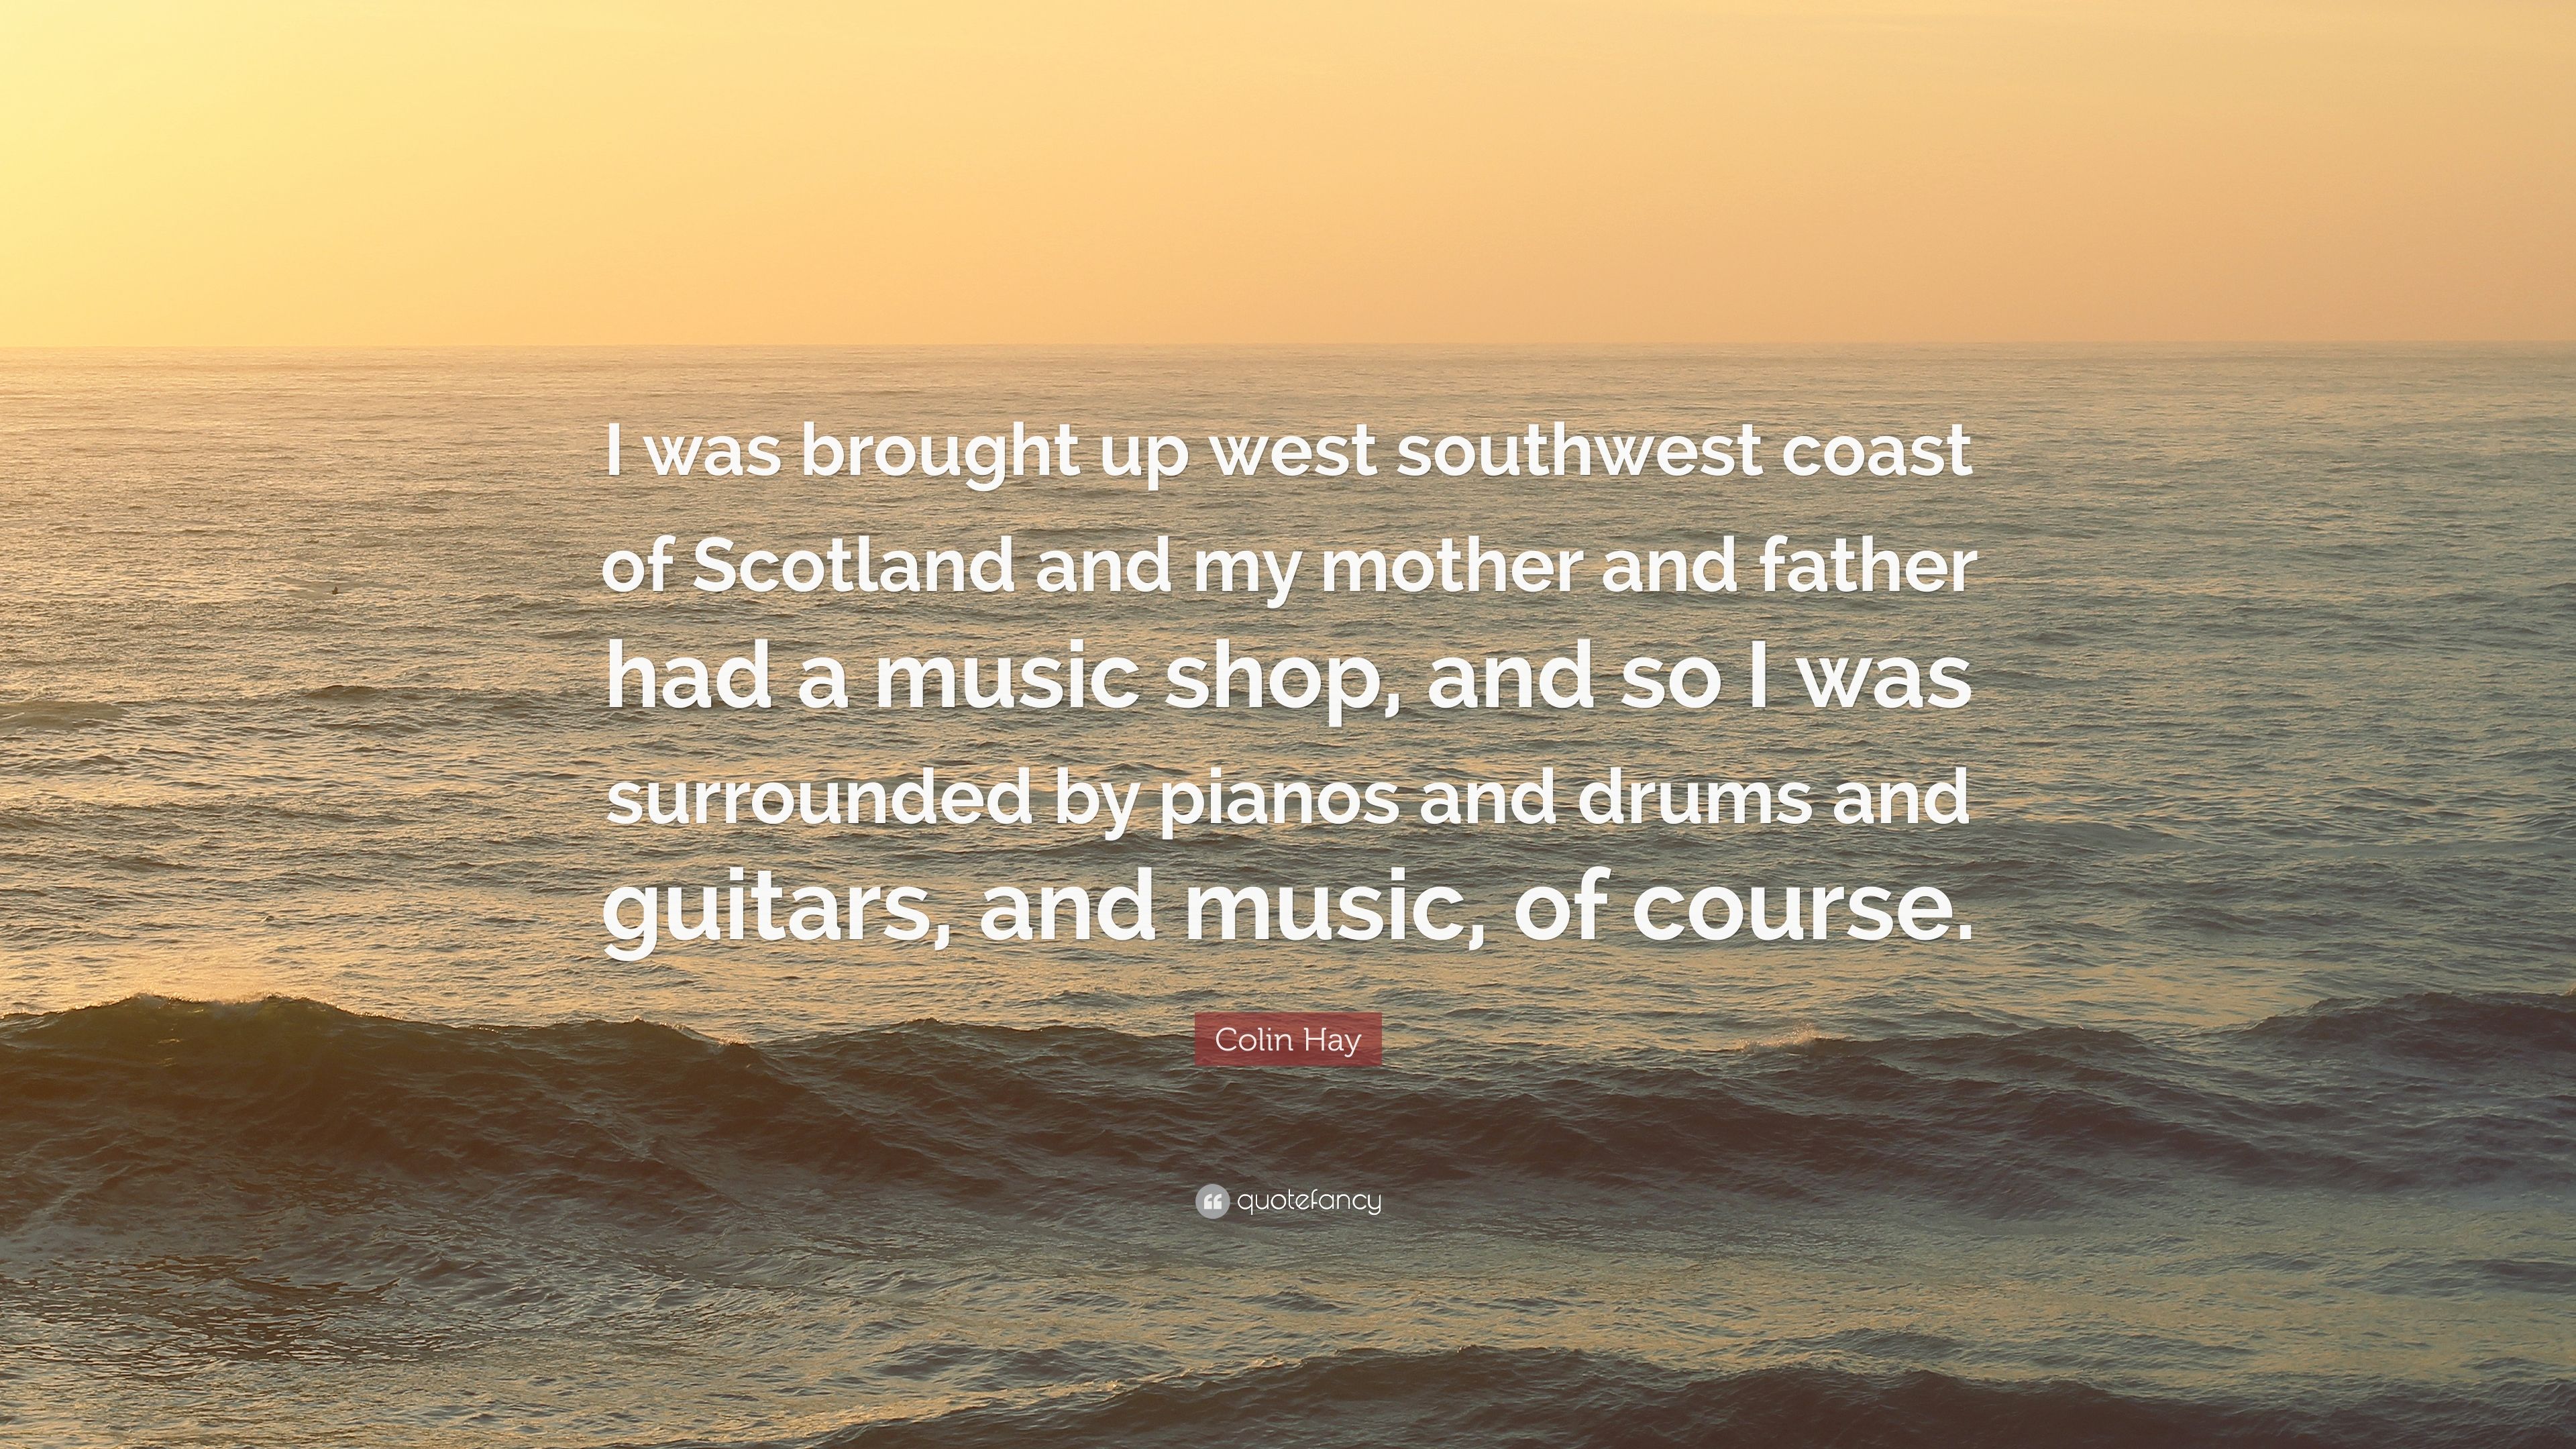 Colin Hay Quote: “I was brought up west southwest coast of Scotland